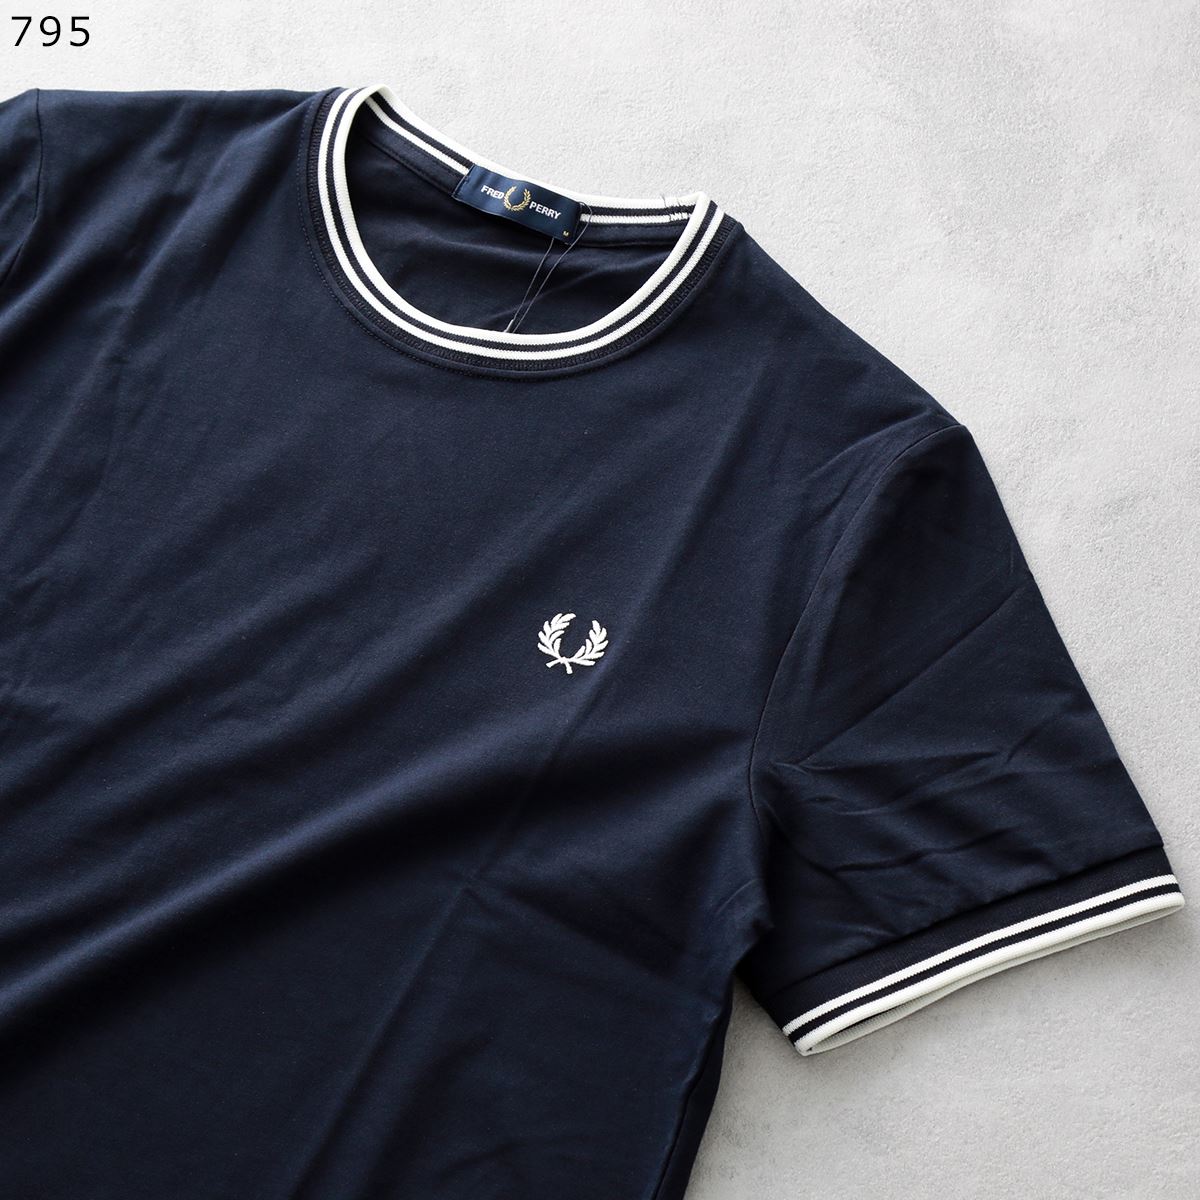 FRED PERRY Tシャツ TWIN TIPPED T-SHIRT M1588 レディース クル...